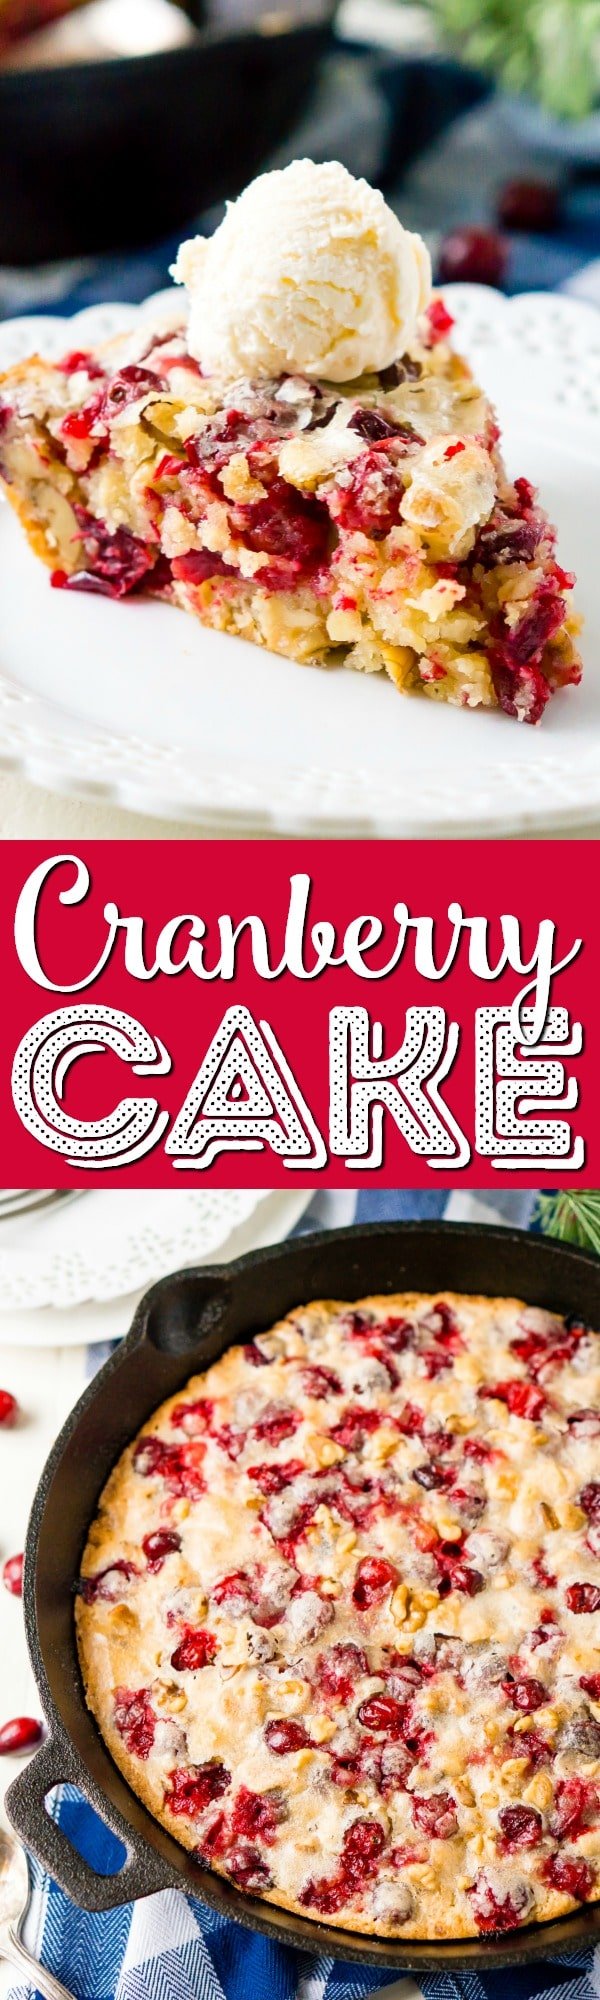 This Cranberry Cake combines sweet and tart in a delicious holiday dessert bursting with fresh red berries! A simple, old fashioned, single layer cake baked right in a skillet! via @sugarandsoulco